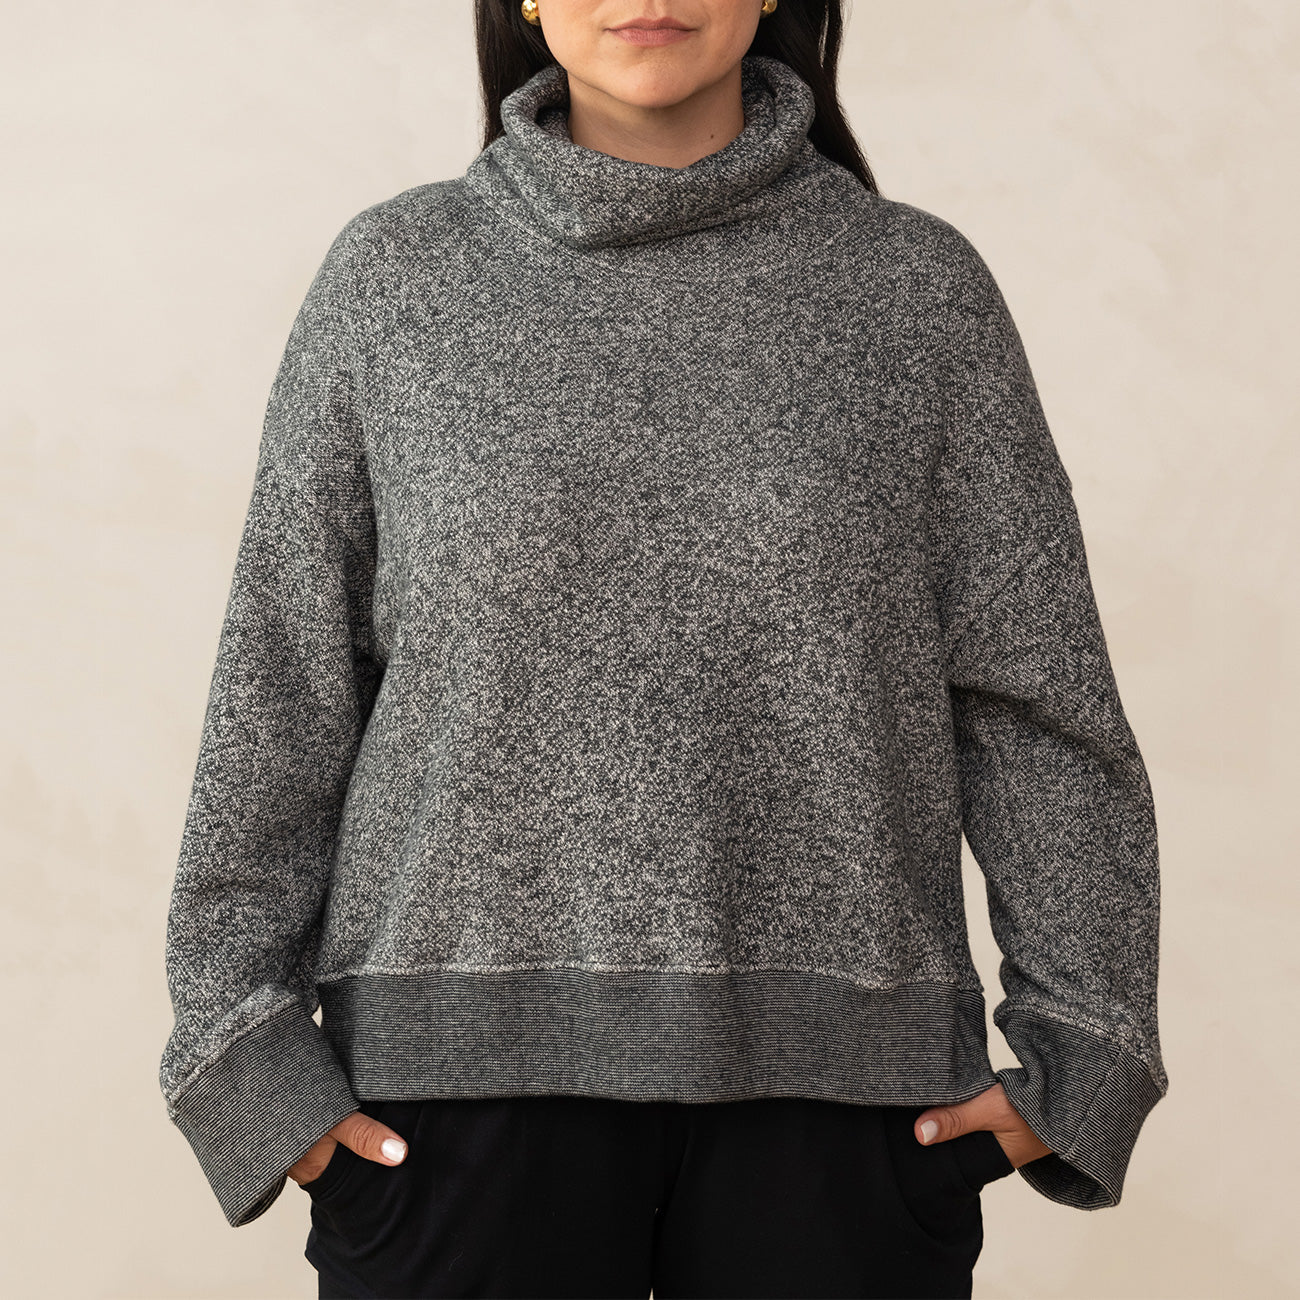 woman wearing a high neck, loose grey sweater